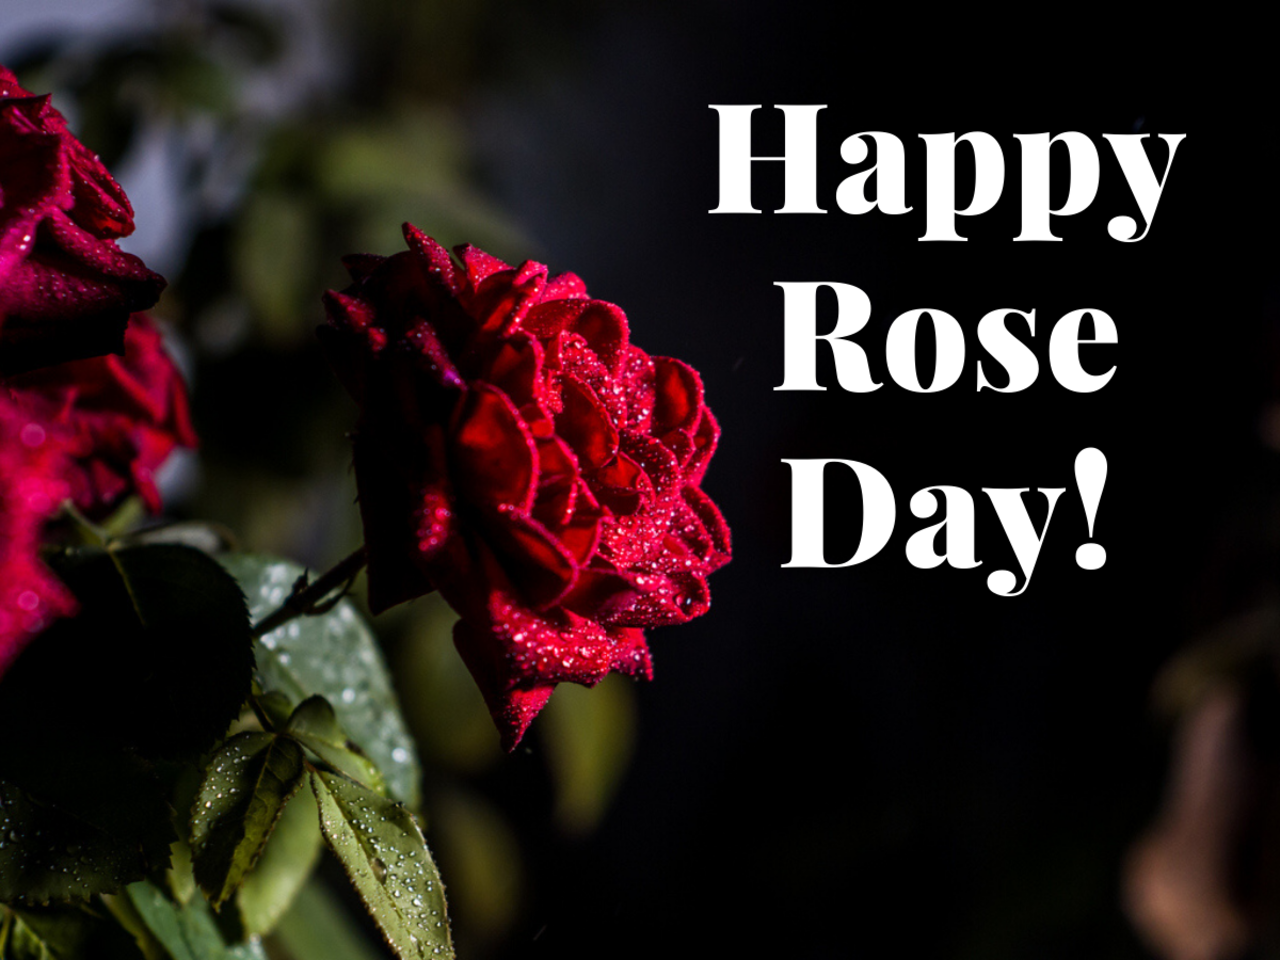 Happy rose day images HD wallpapers  happy rose day beautiful picture   Web शयर